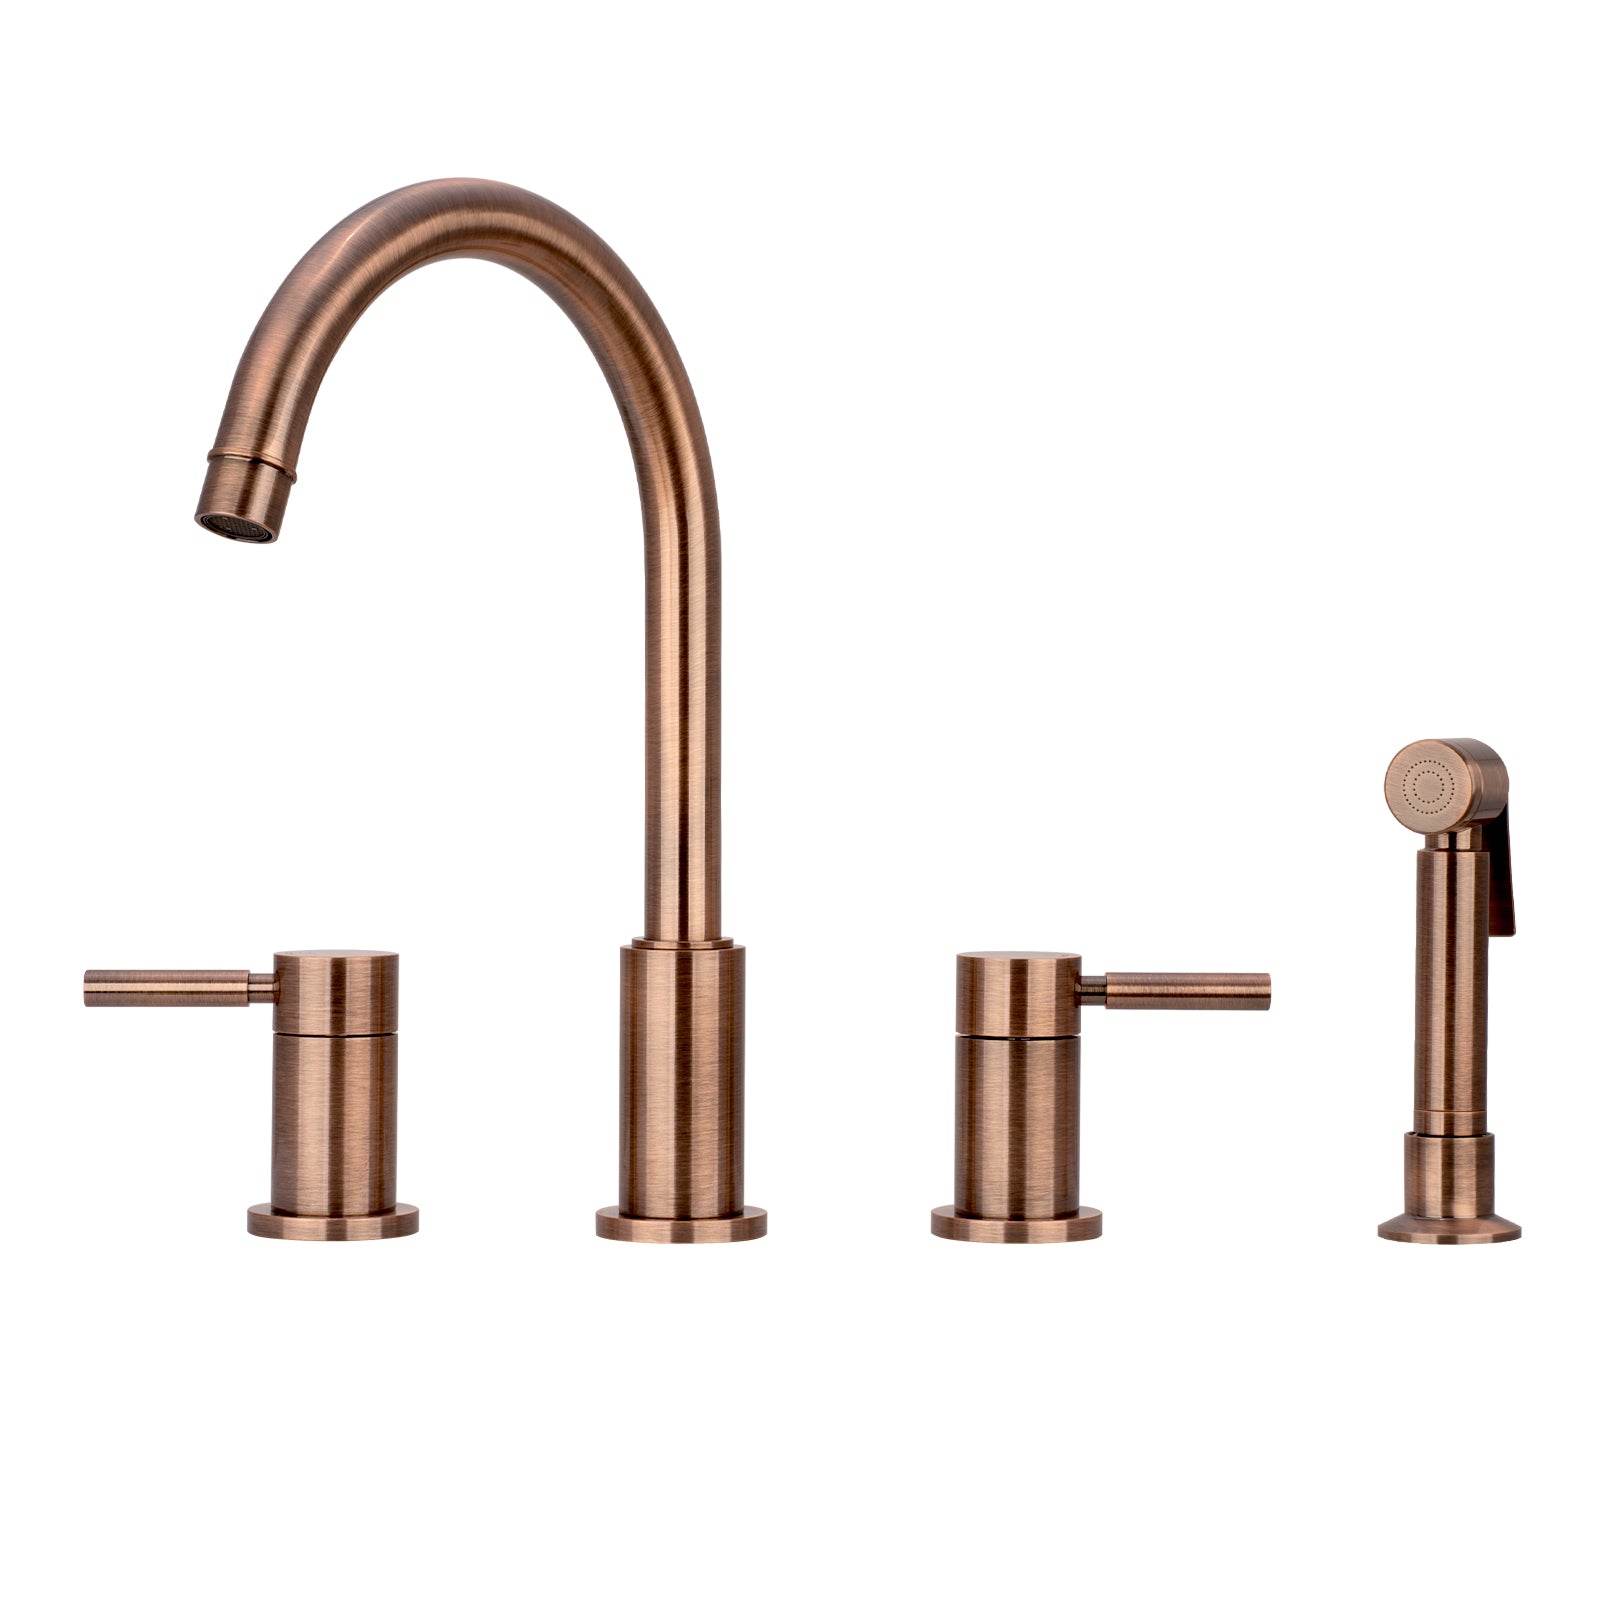 Two-Handles Antique Copper Widespread Kitchen Faucet with Side Sprayer - AK96866 -AC